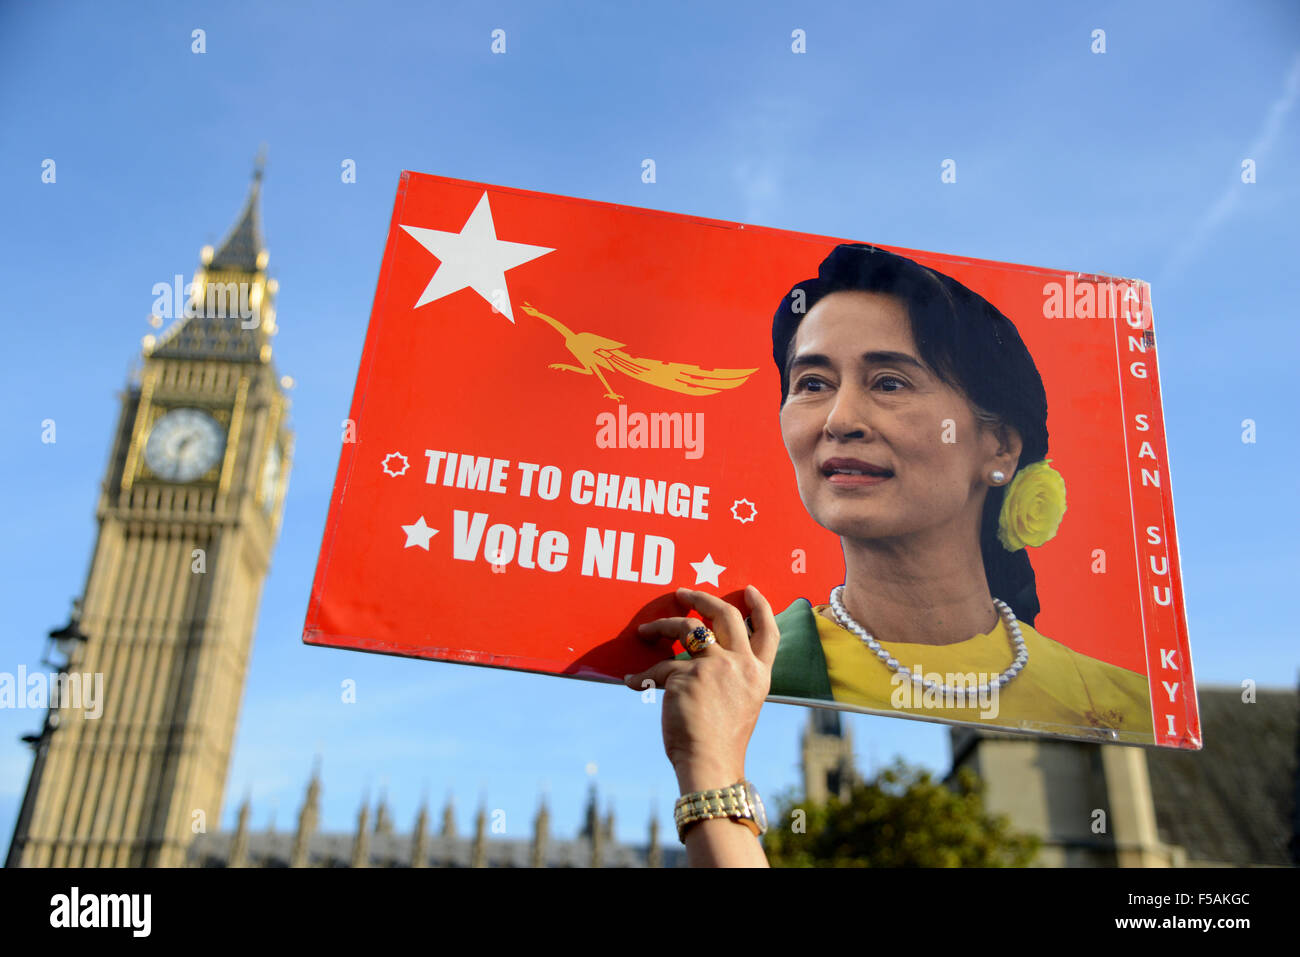 National League for Democracy in Burma campaign outside parliament in London, Britain, UK Stock Photo